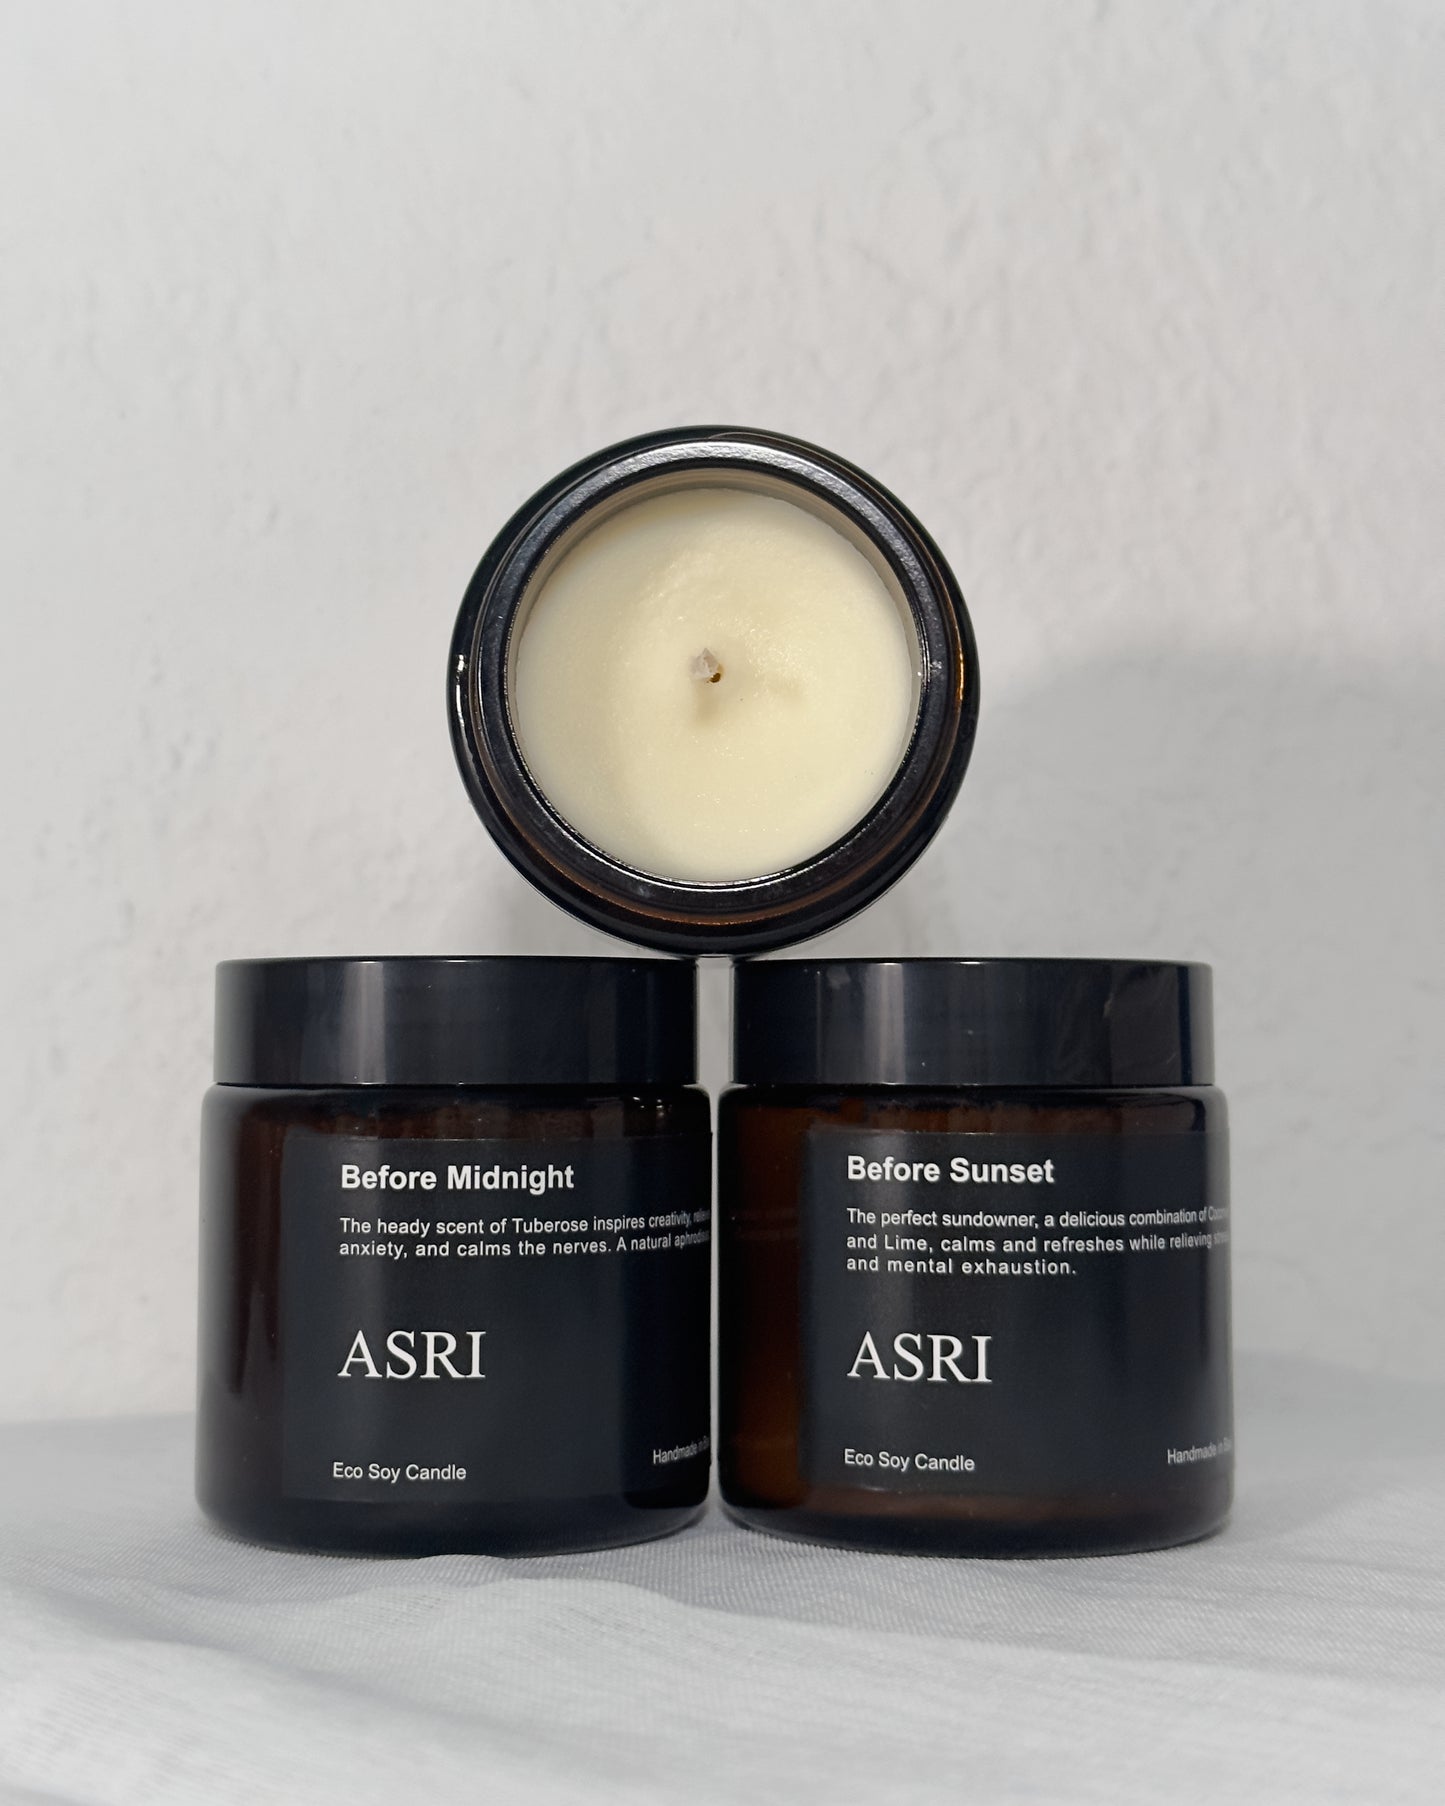 Asri Eco Soy Candle - Before Midnight